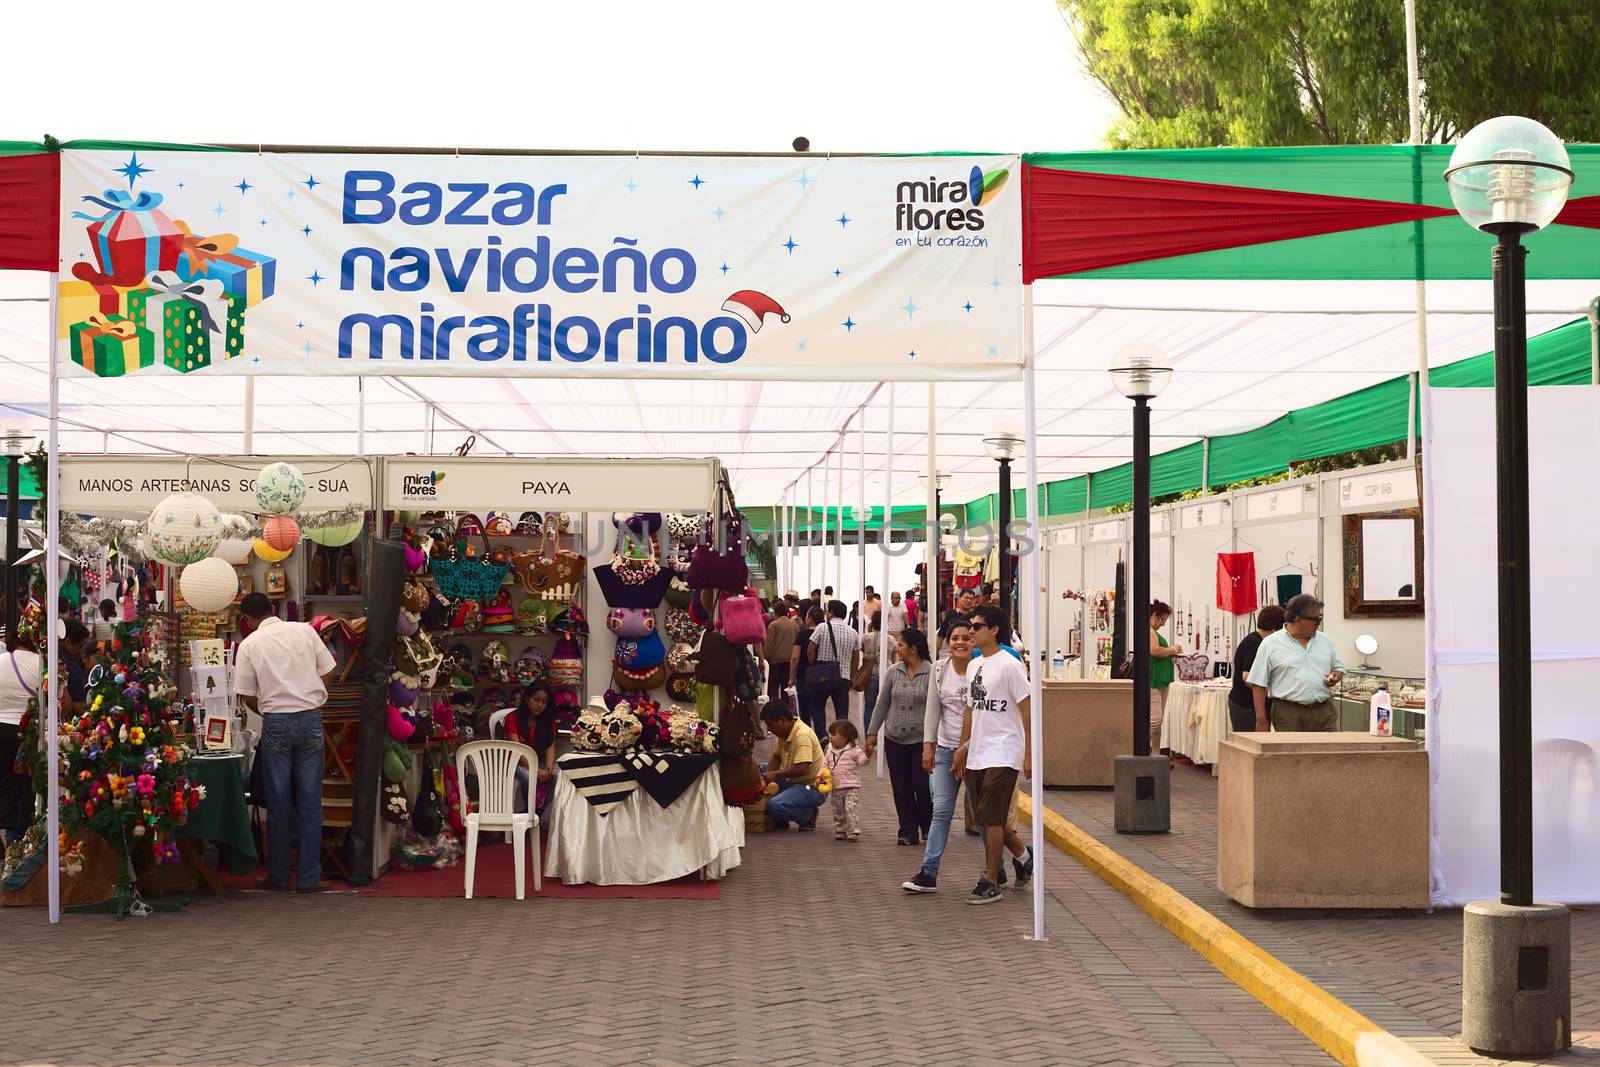 LIMA, PERU - DECEMBER 13, 2011: Unidentified people on the Bazar Navide�o Miraflorino (Miraflores Christmas Market) at the Kennedy Park on December 13, 2011 in Lima, Peru. Different handicrafts, both traditional and modern, are being sold on the Christmas Fair.